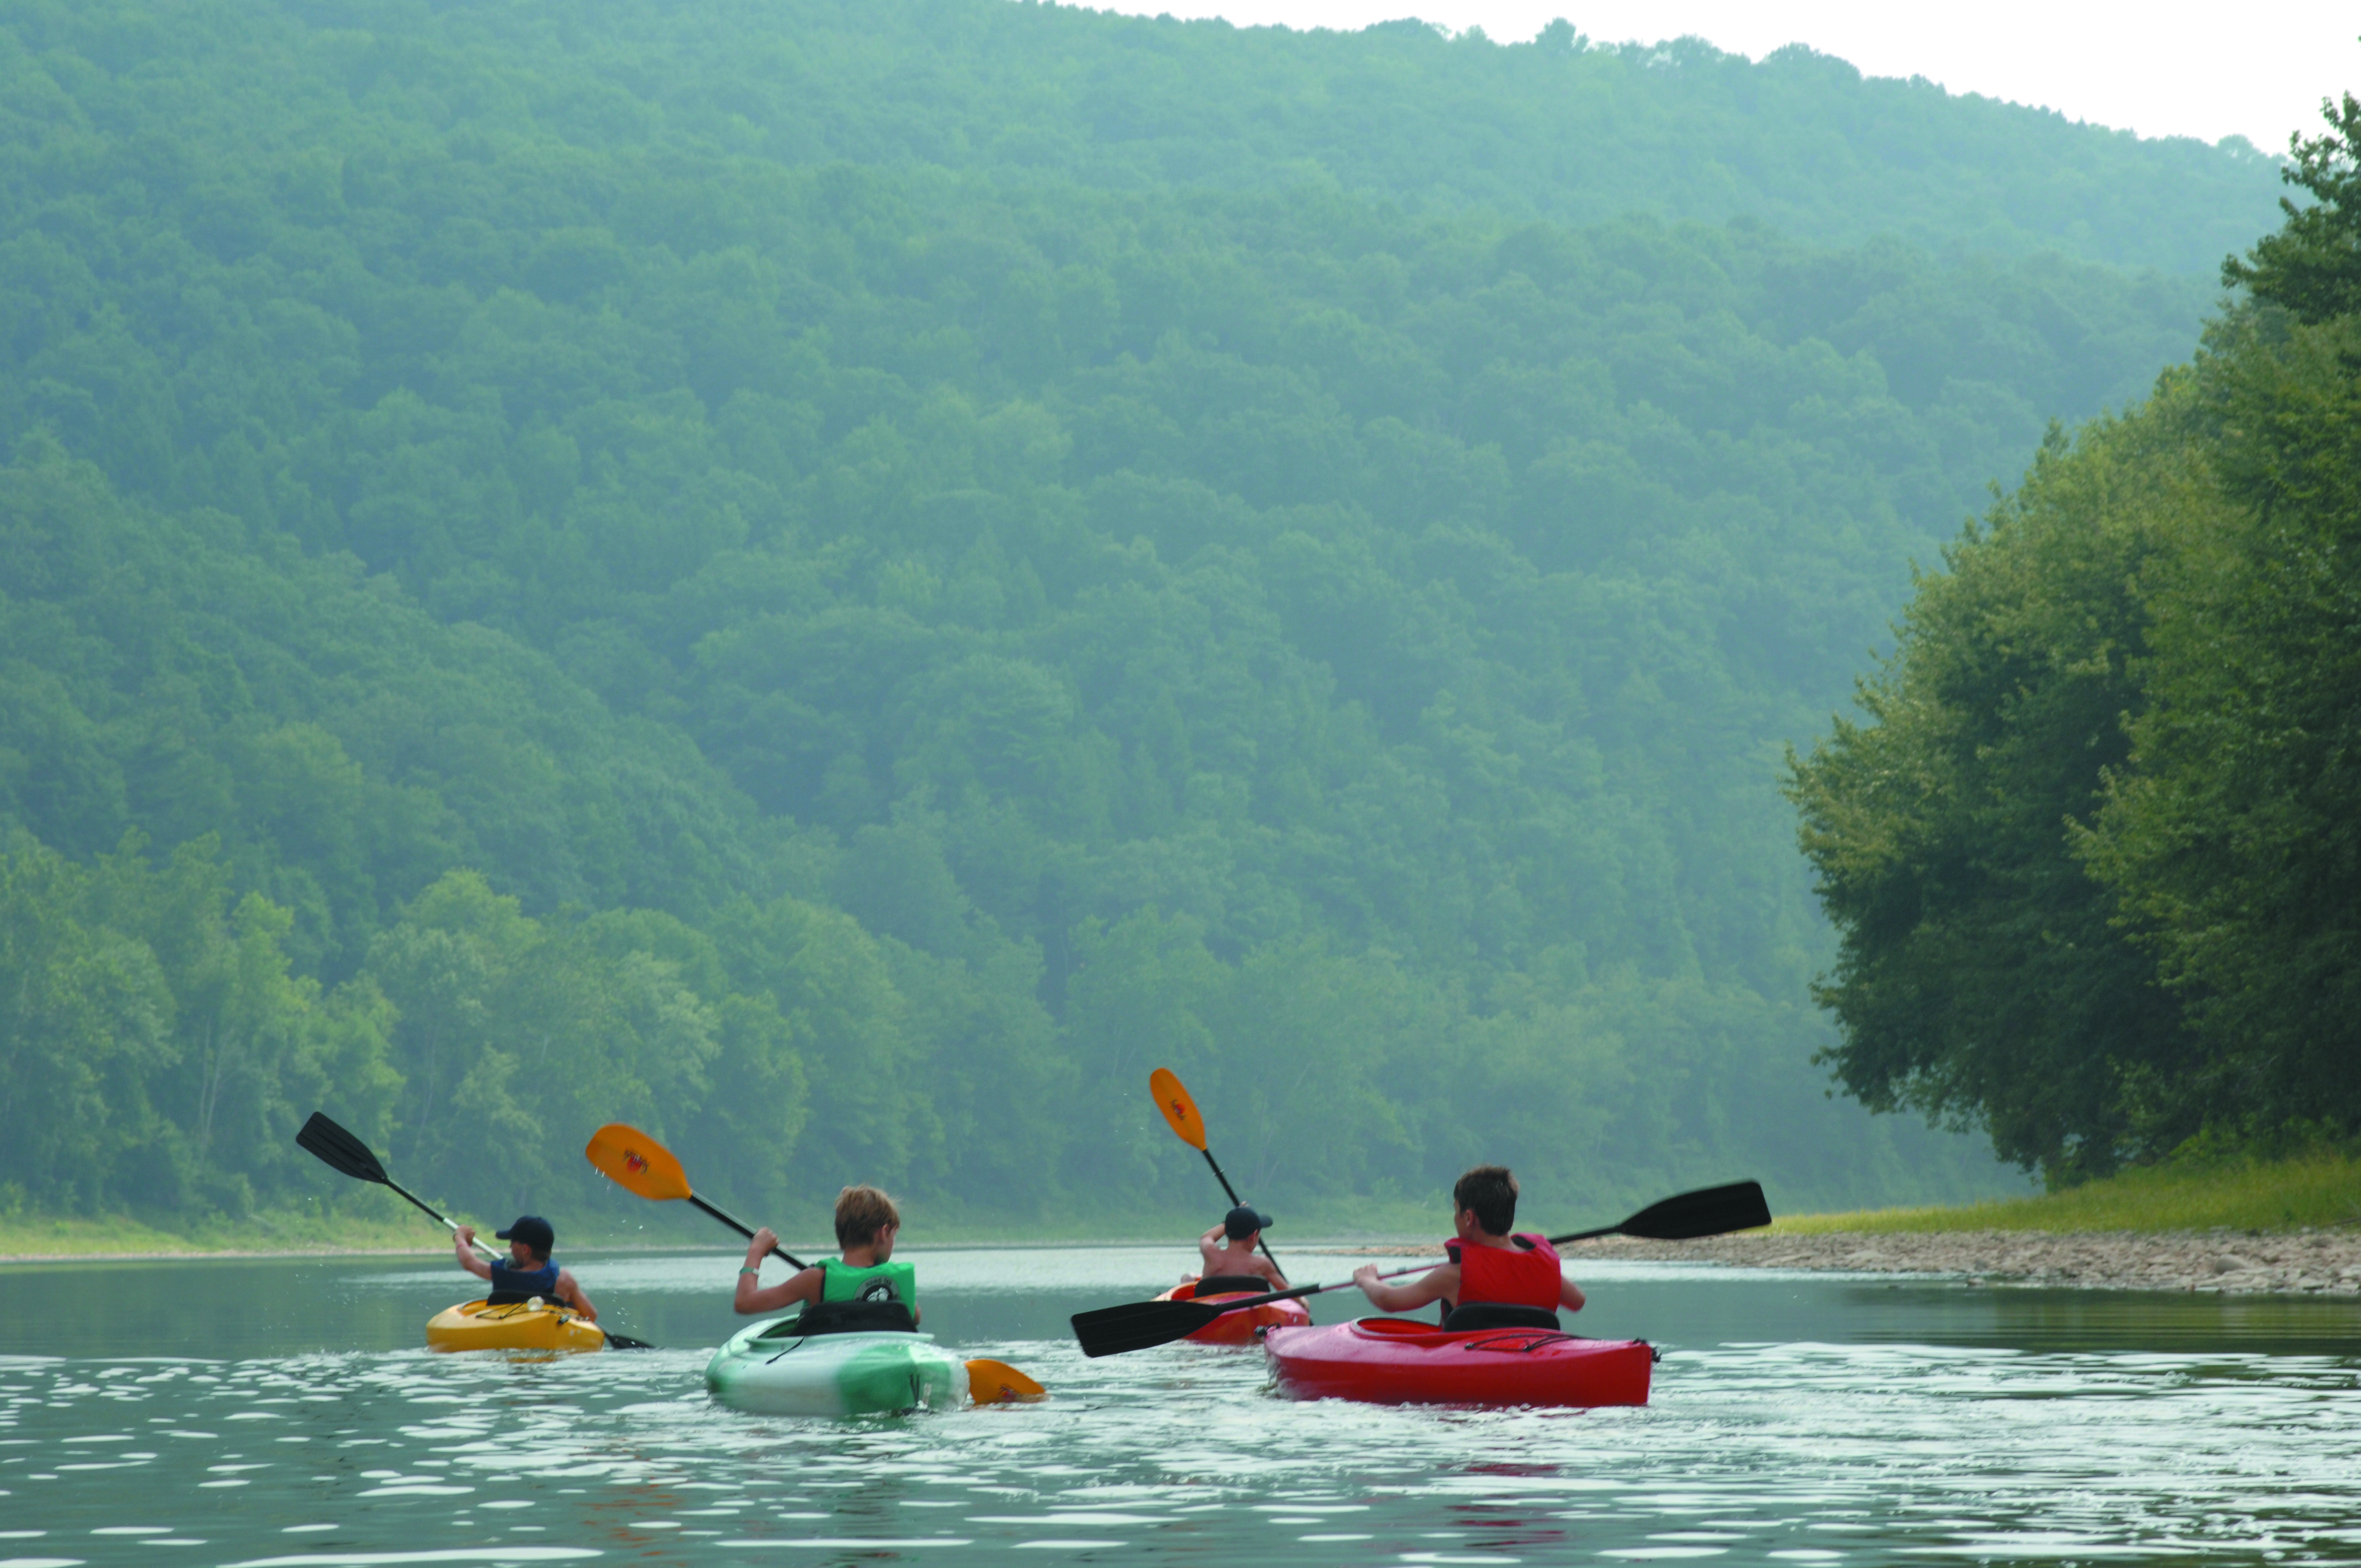 Four youngsters paddle kayaks on calm waters of the Susquehanna River